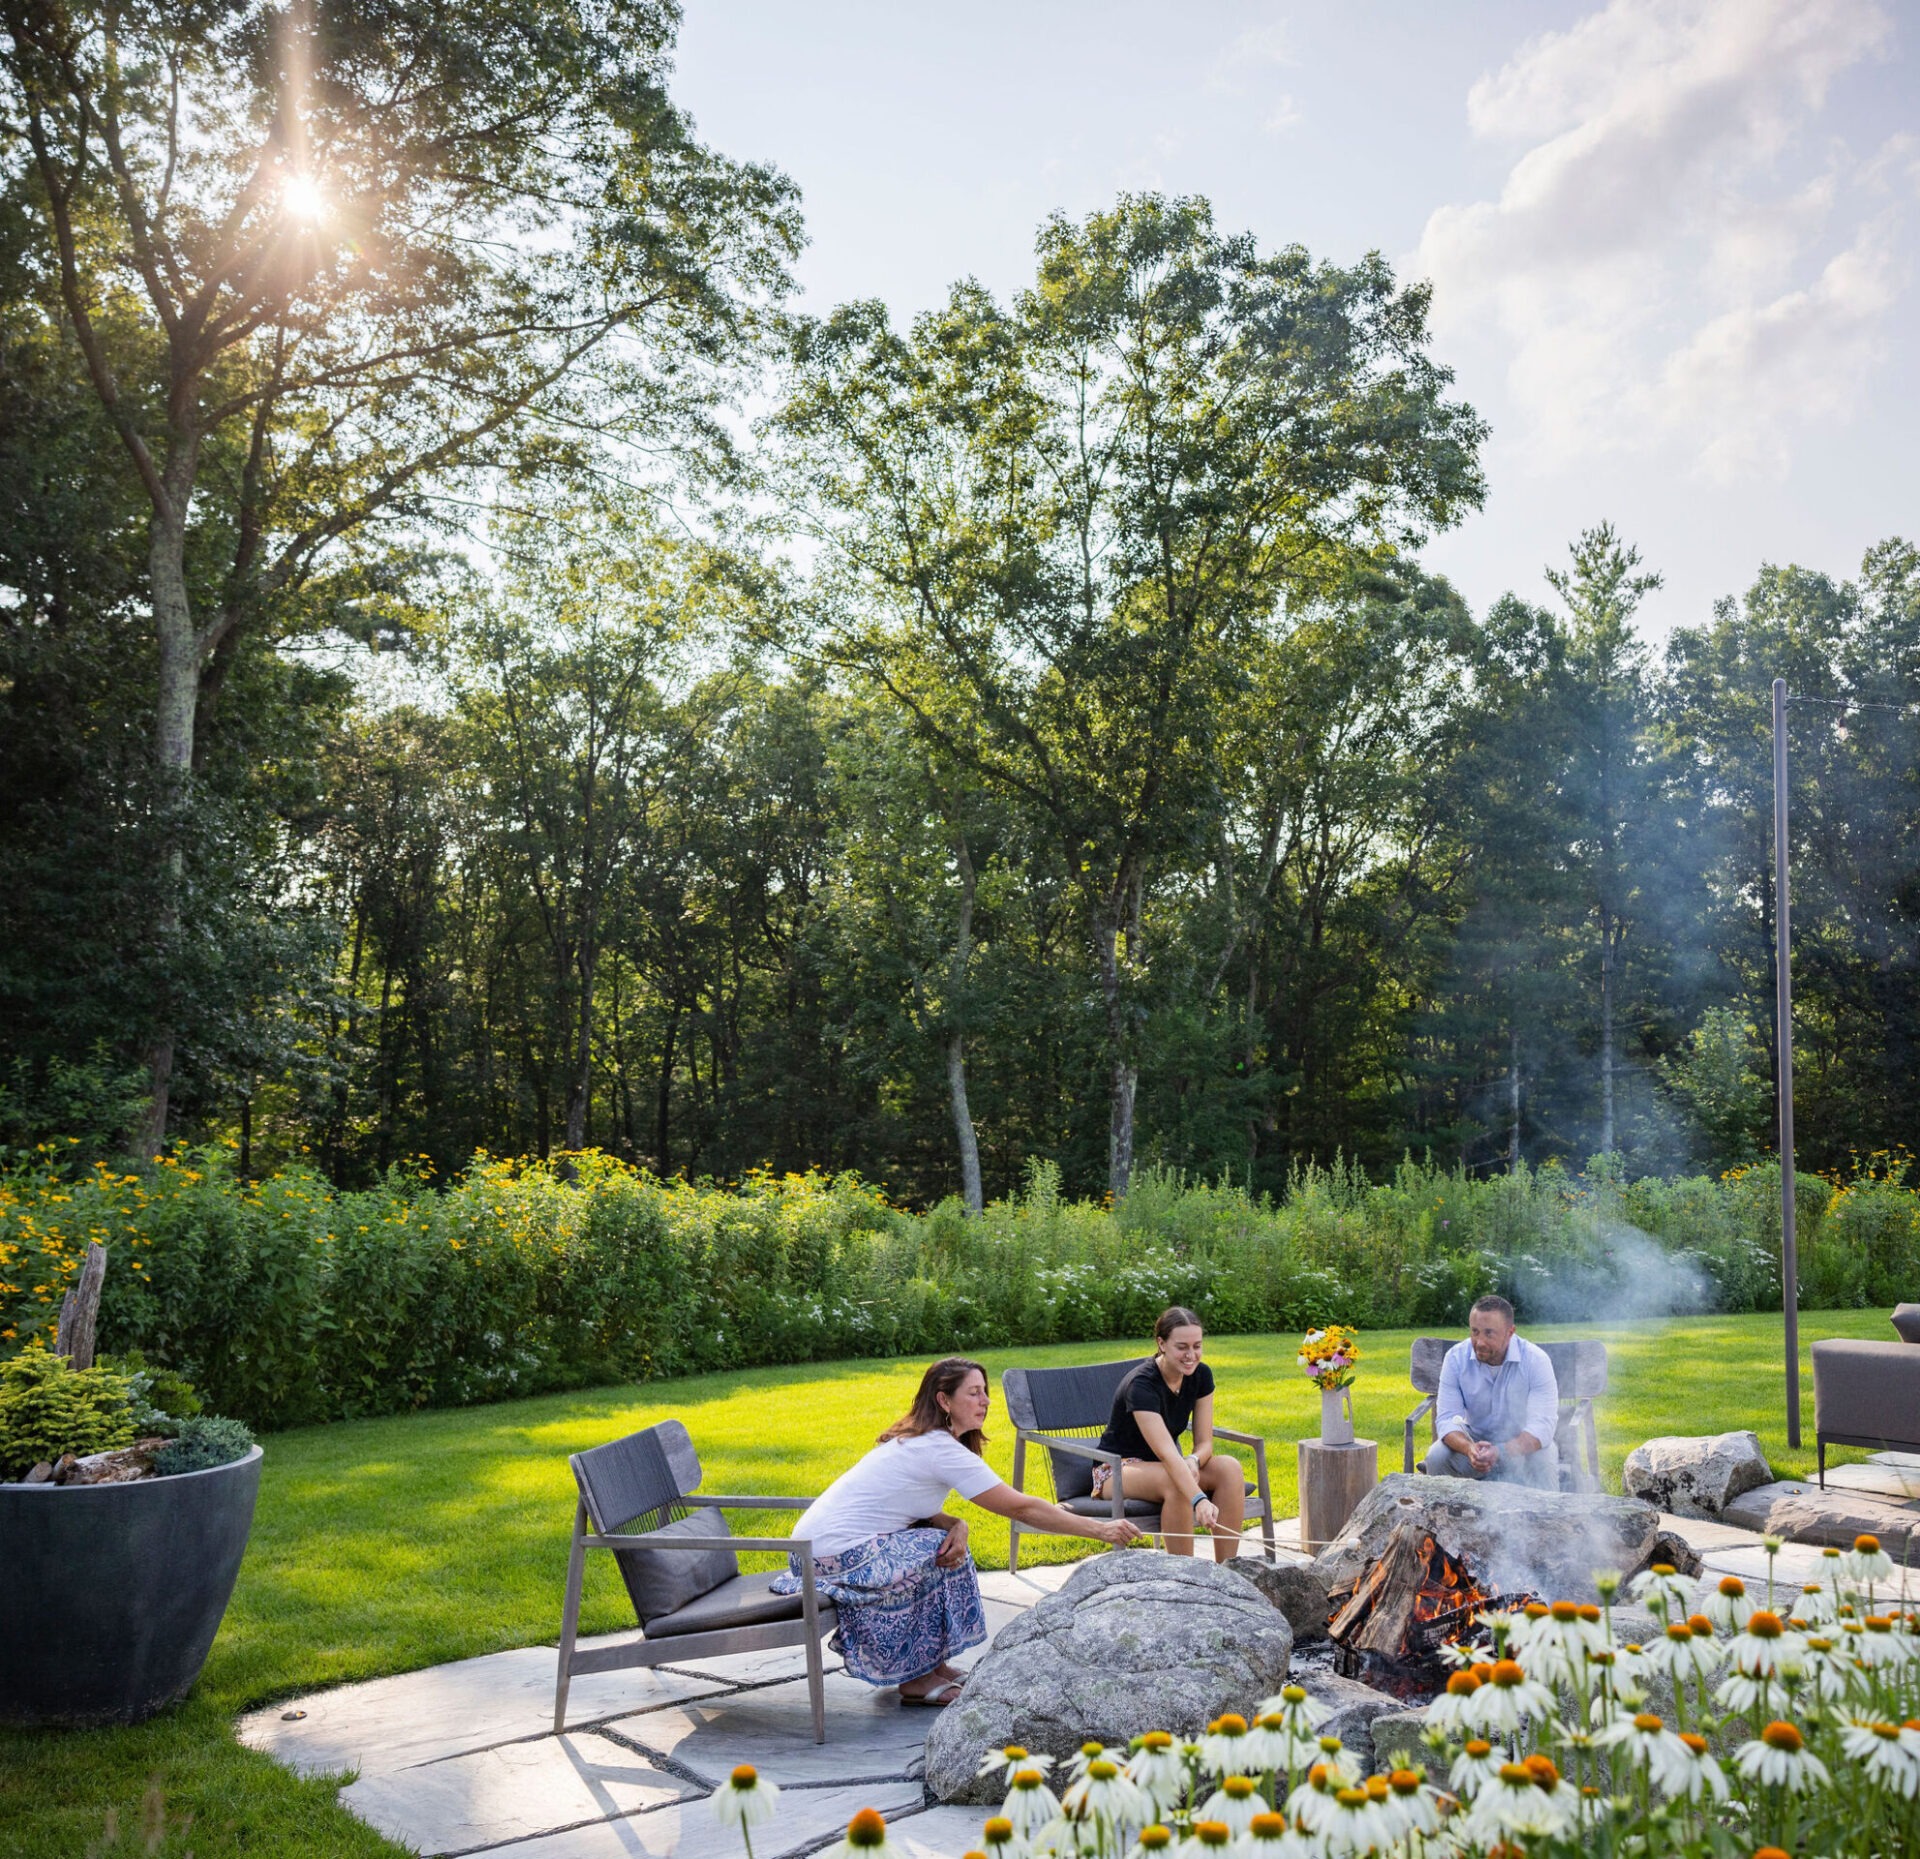 Three people are sitting in a backyard with a fire pit, surrounded by lush greenery, under a clear sky with sunlight streaming through the trees.